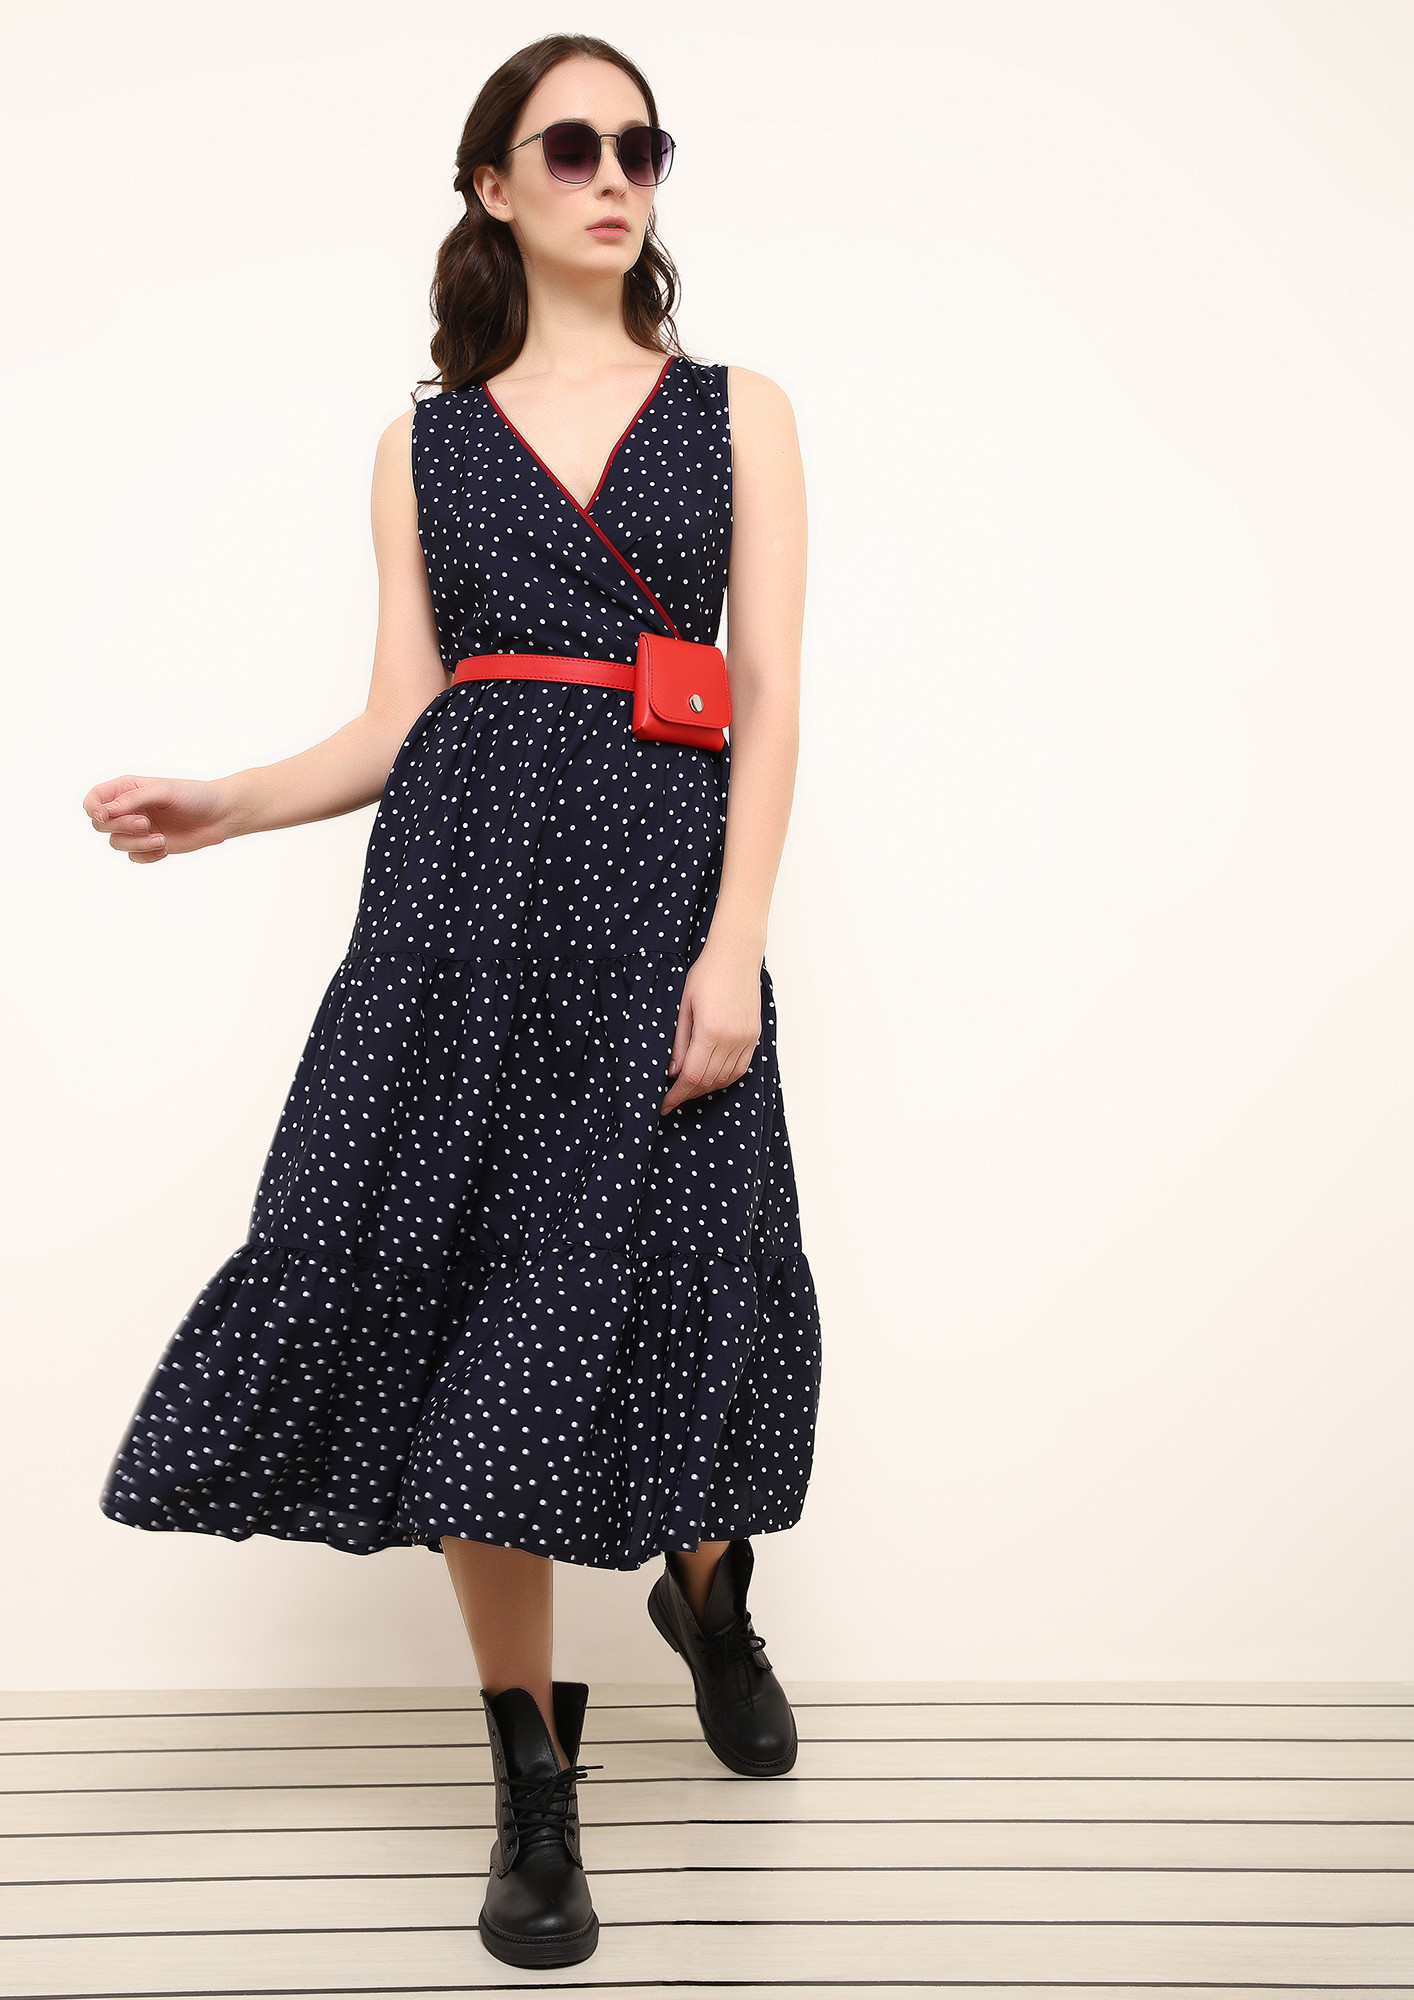 CAUGHT BY THE DOTS NAVY MIDI DRESS